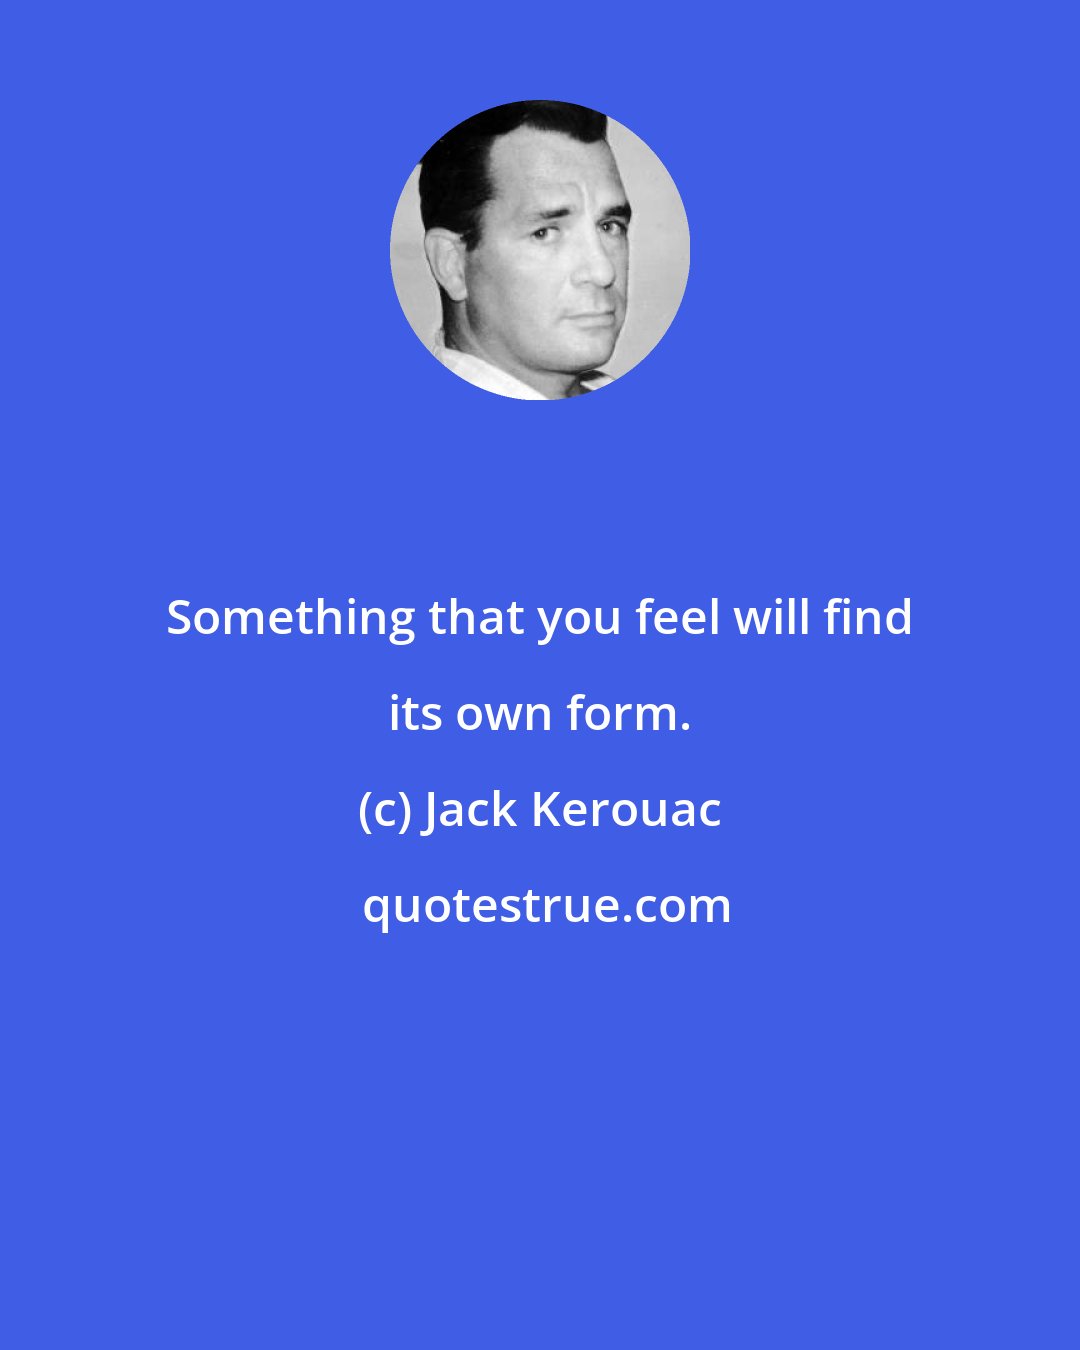 Jack Kerouac: Something that you feel will find its own form.